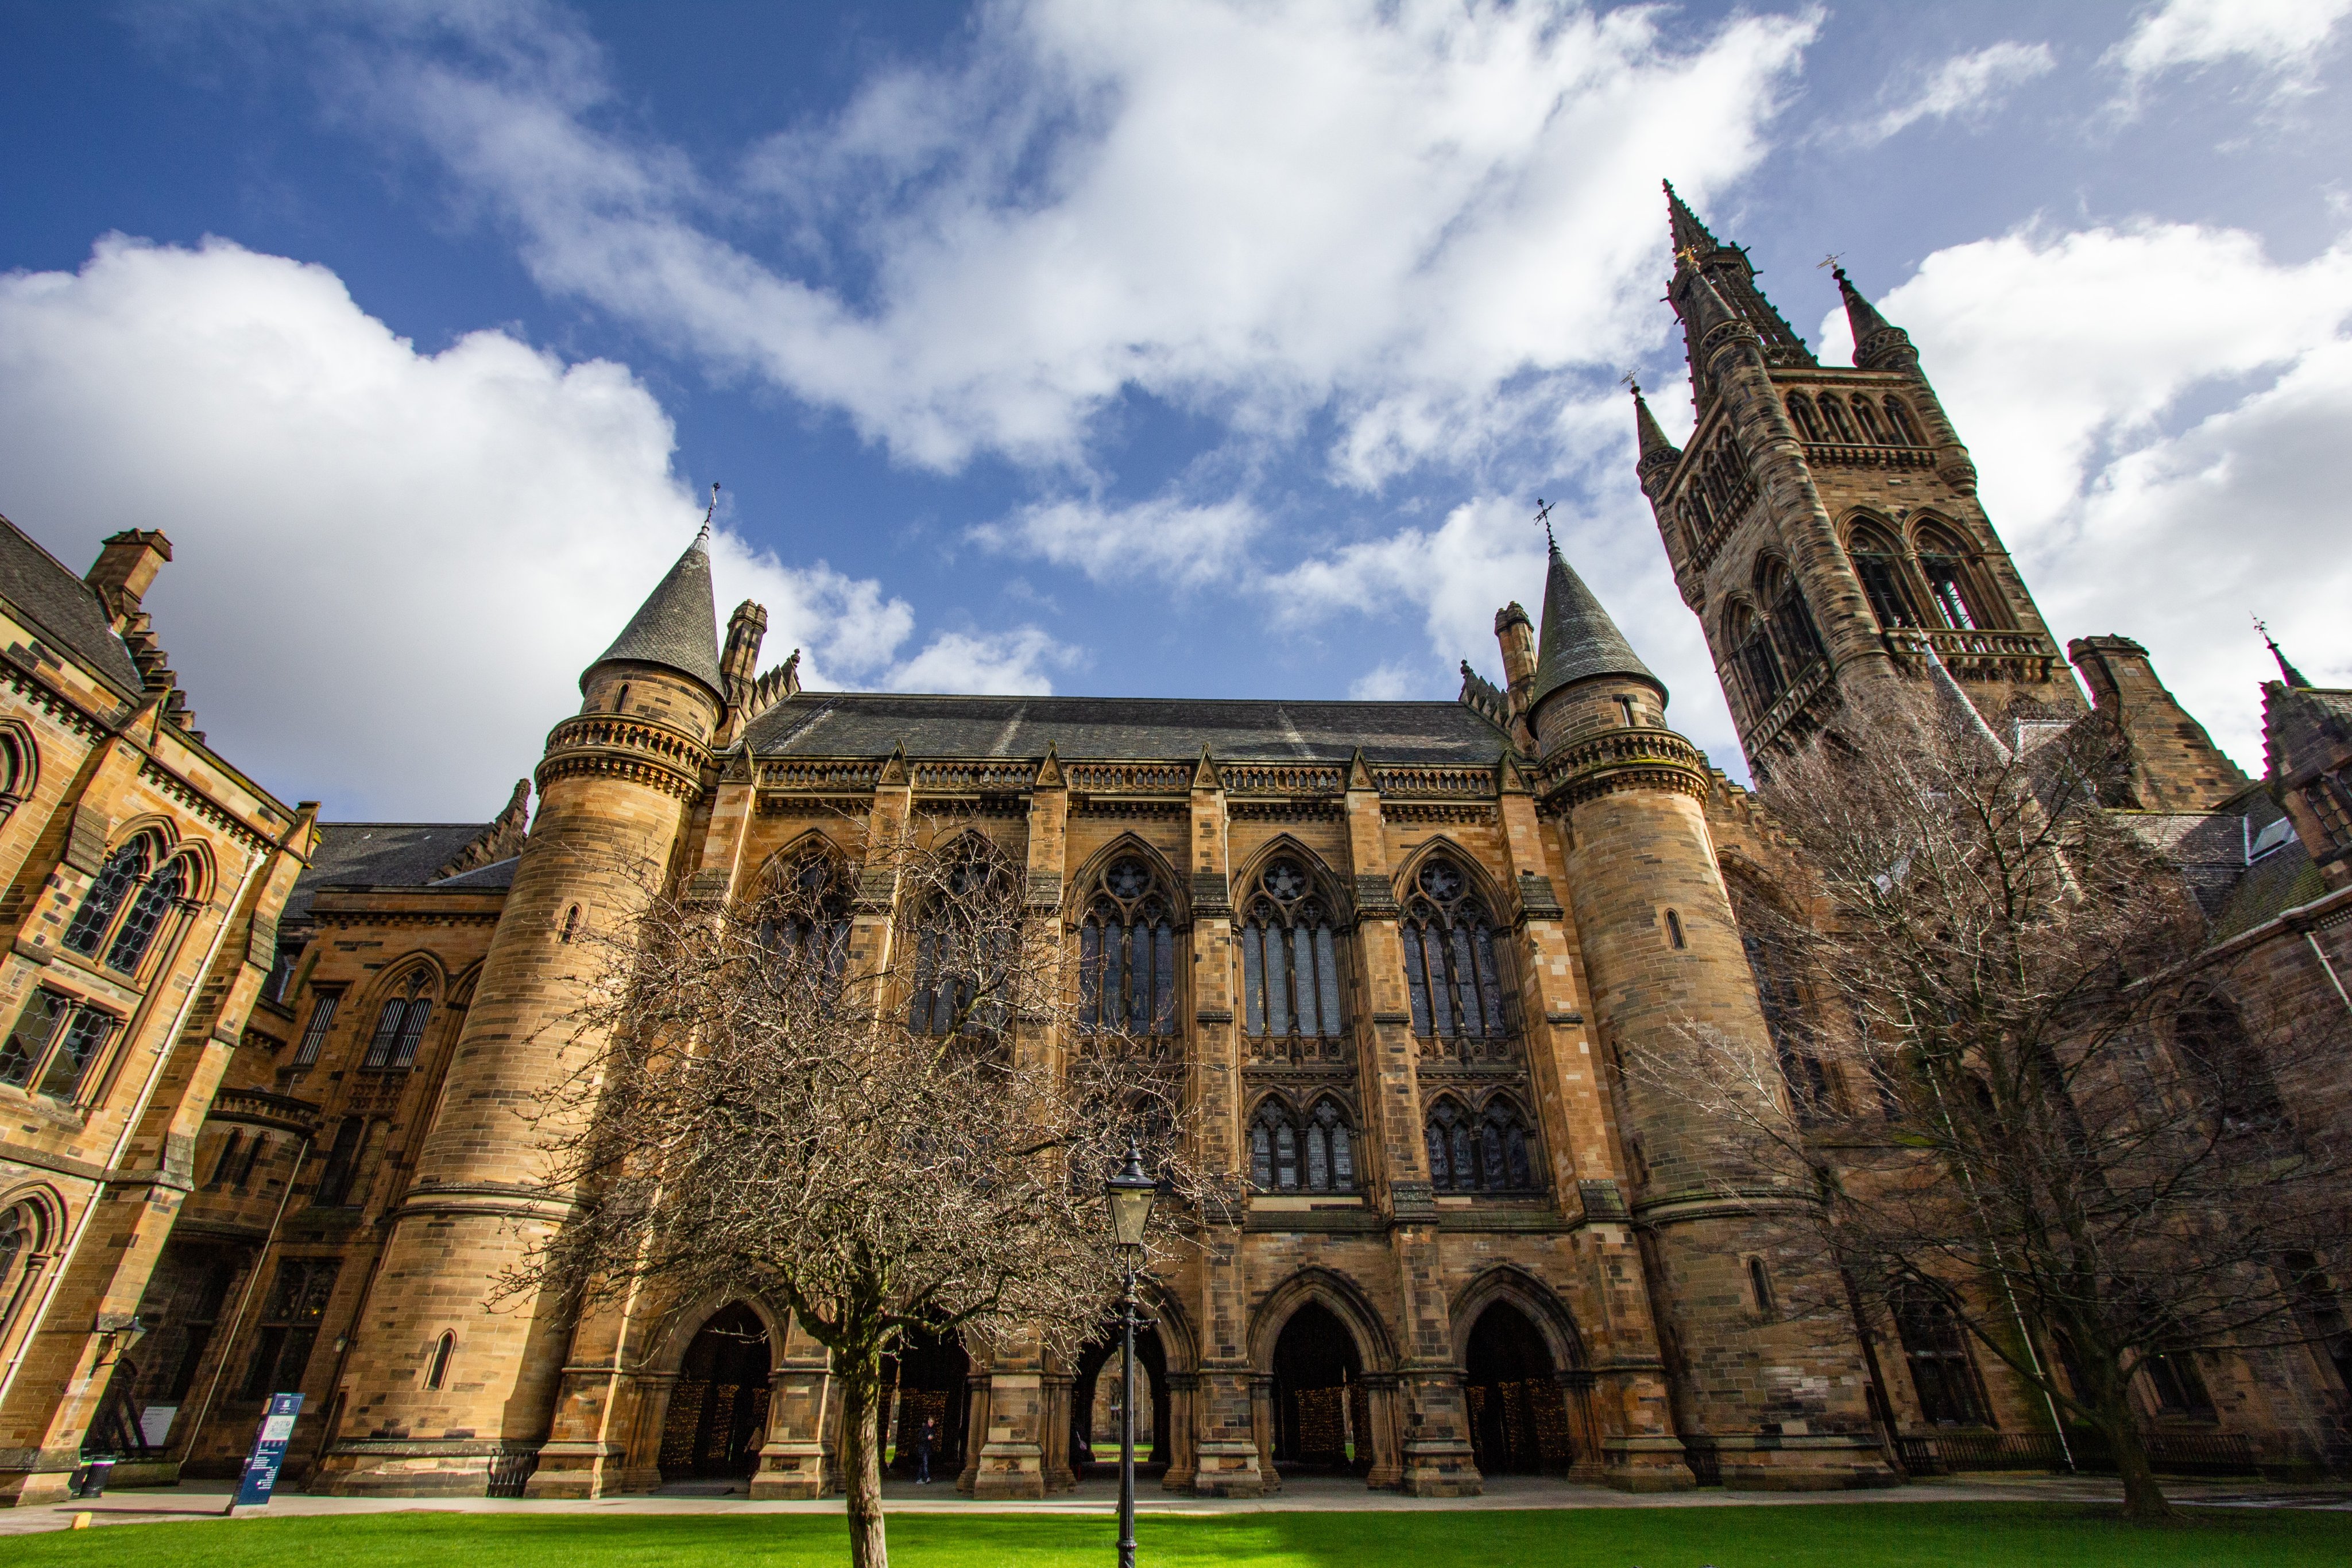 The Gilbert Scott building at the University of Glasgow from the west quad